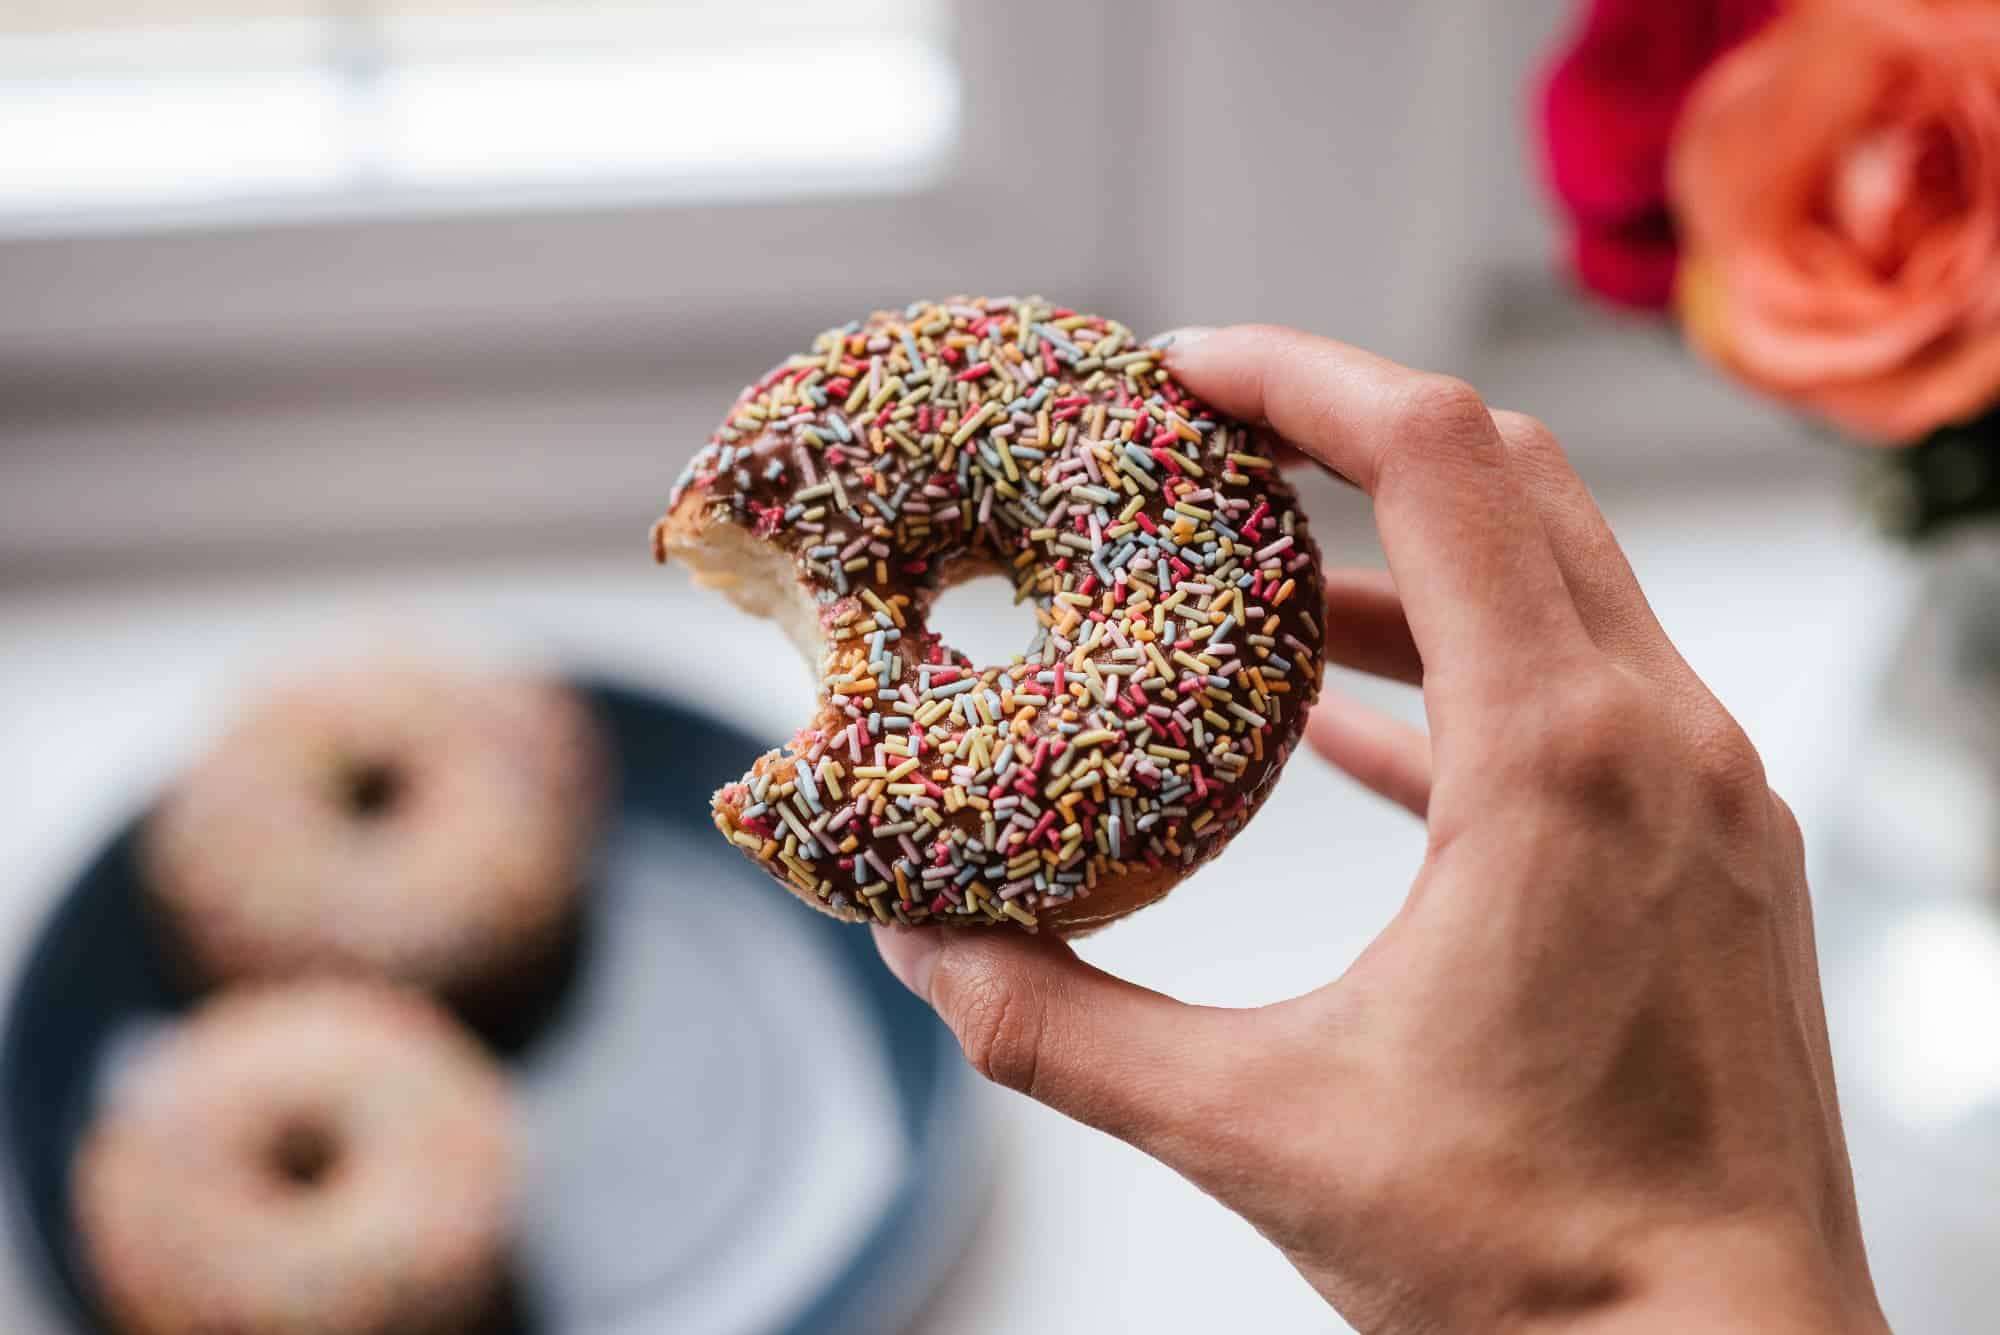 Ring donut with sprinkles with a bite out of it